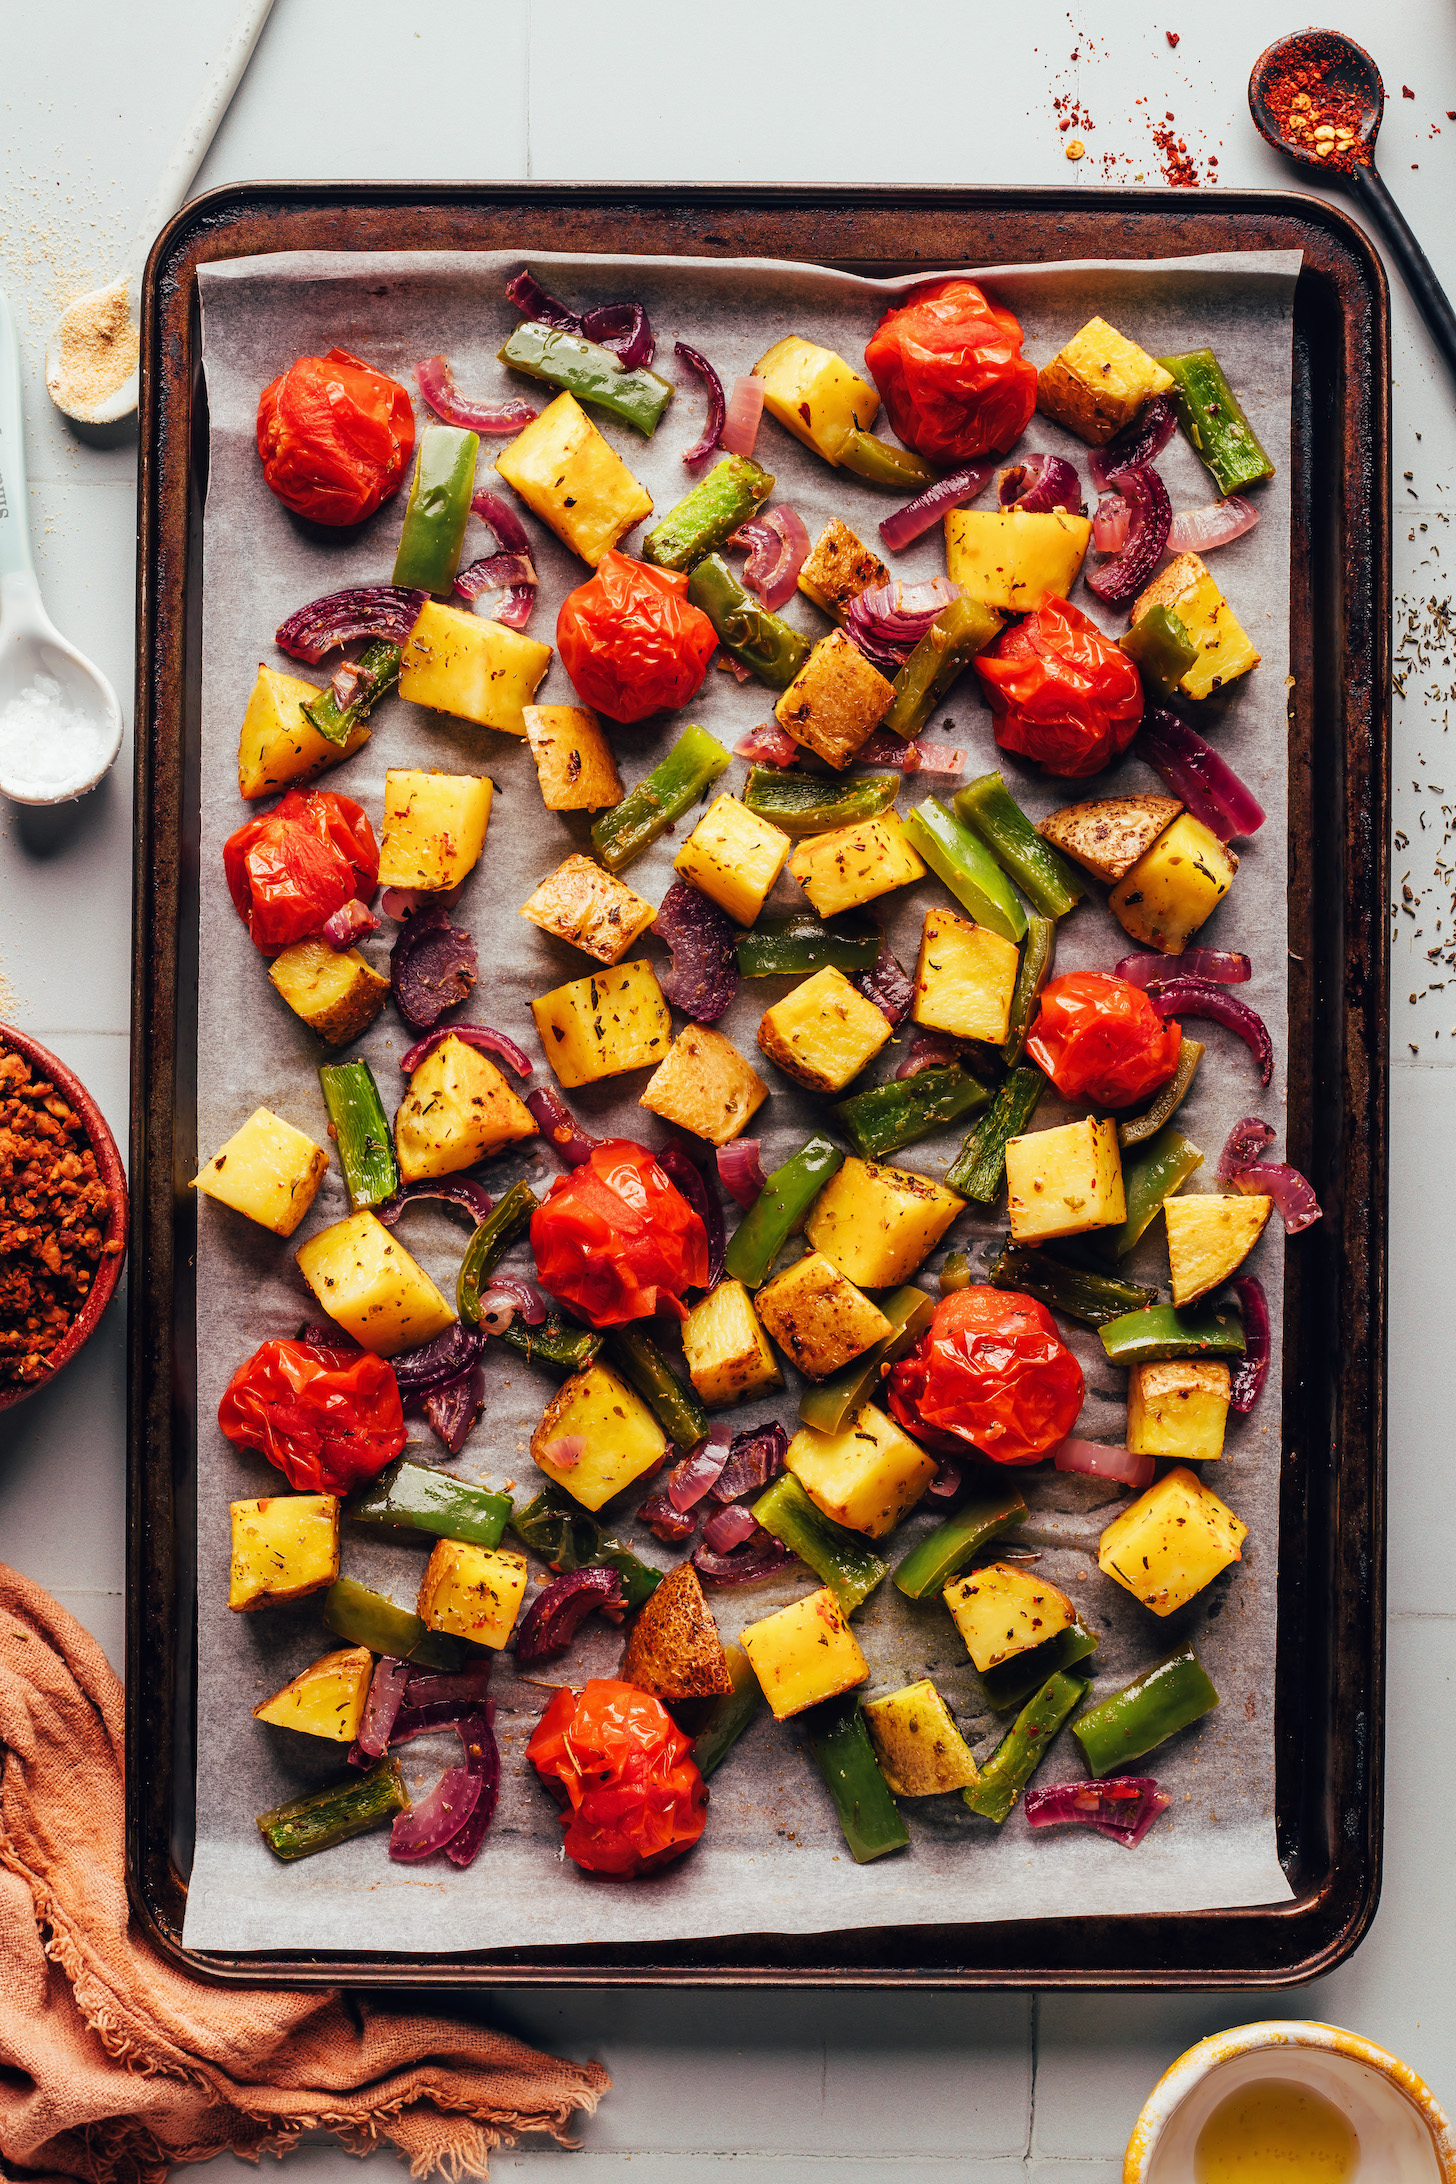 Baking sheet with roasted potatoes, red onion, green bell pepper, and cherry tomatoes